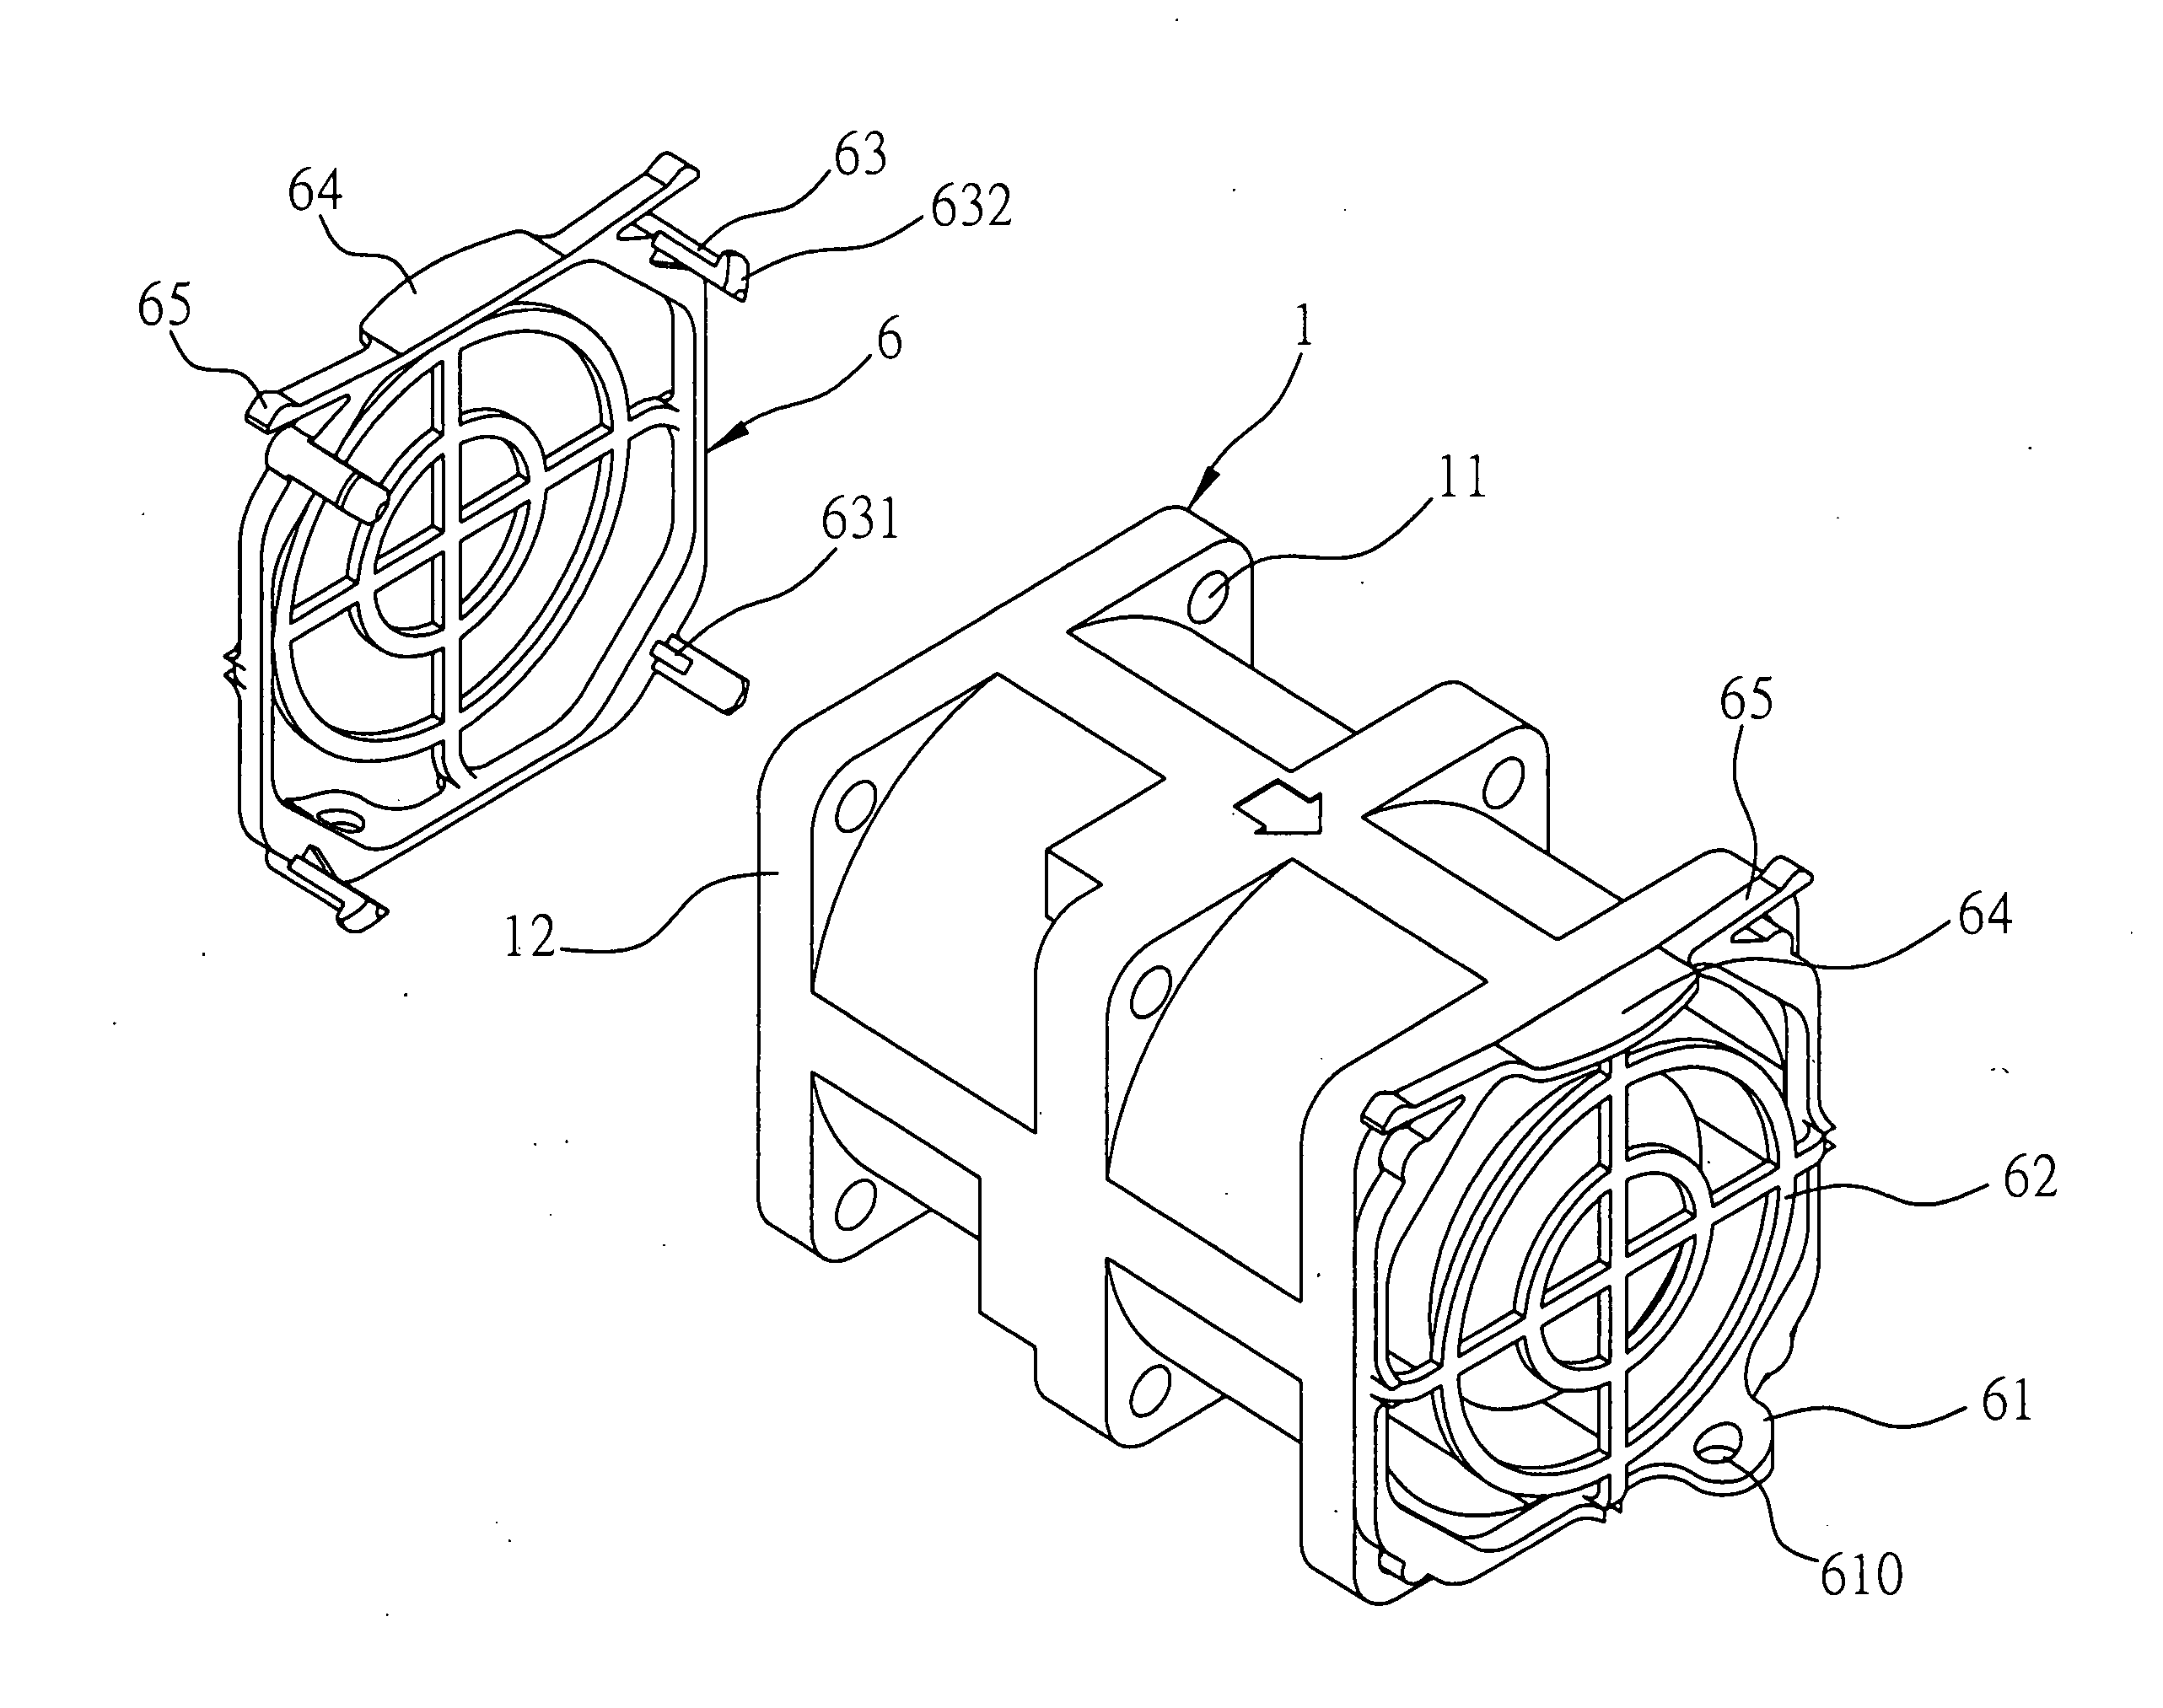 Fan cover structure